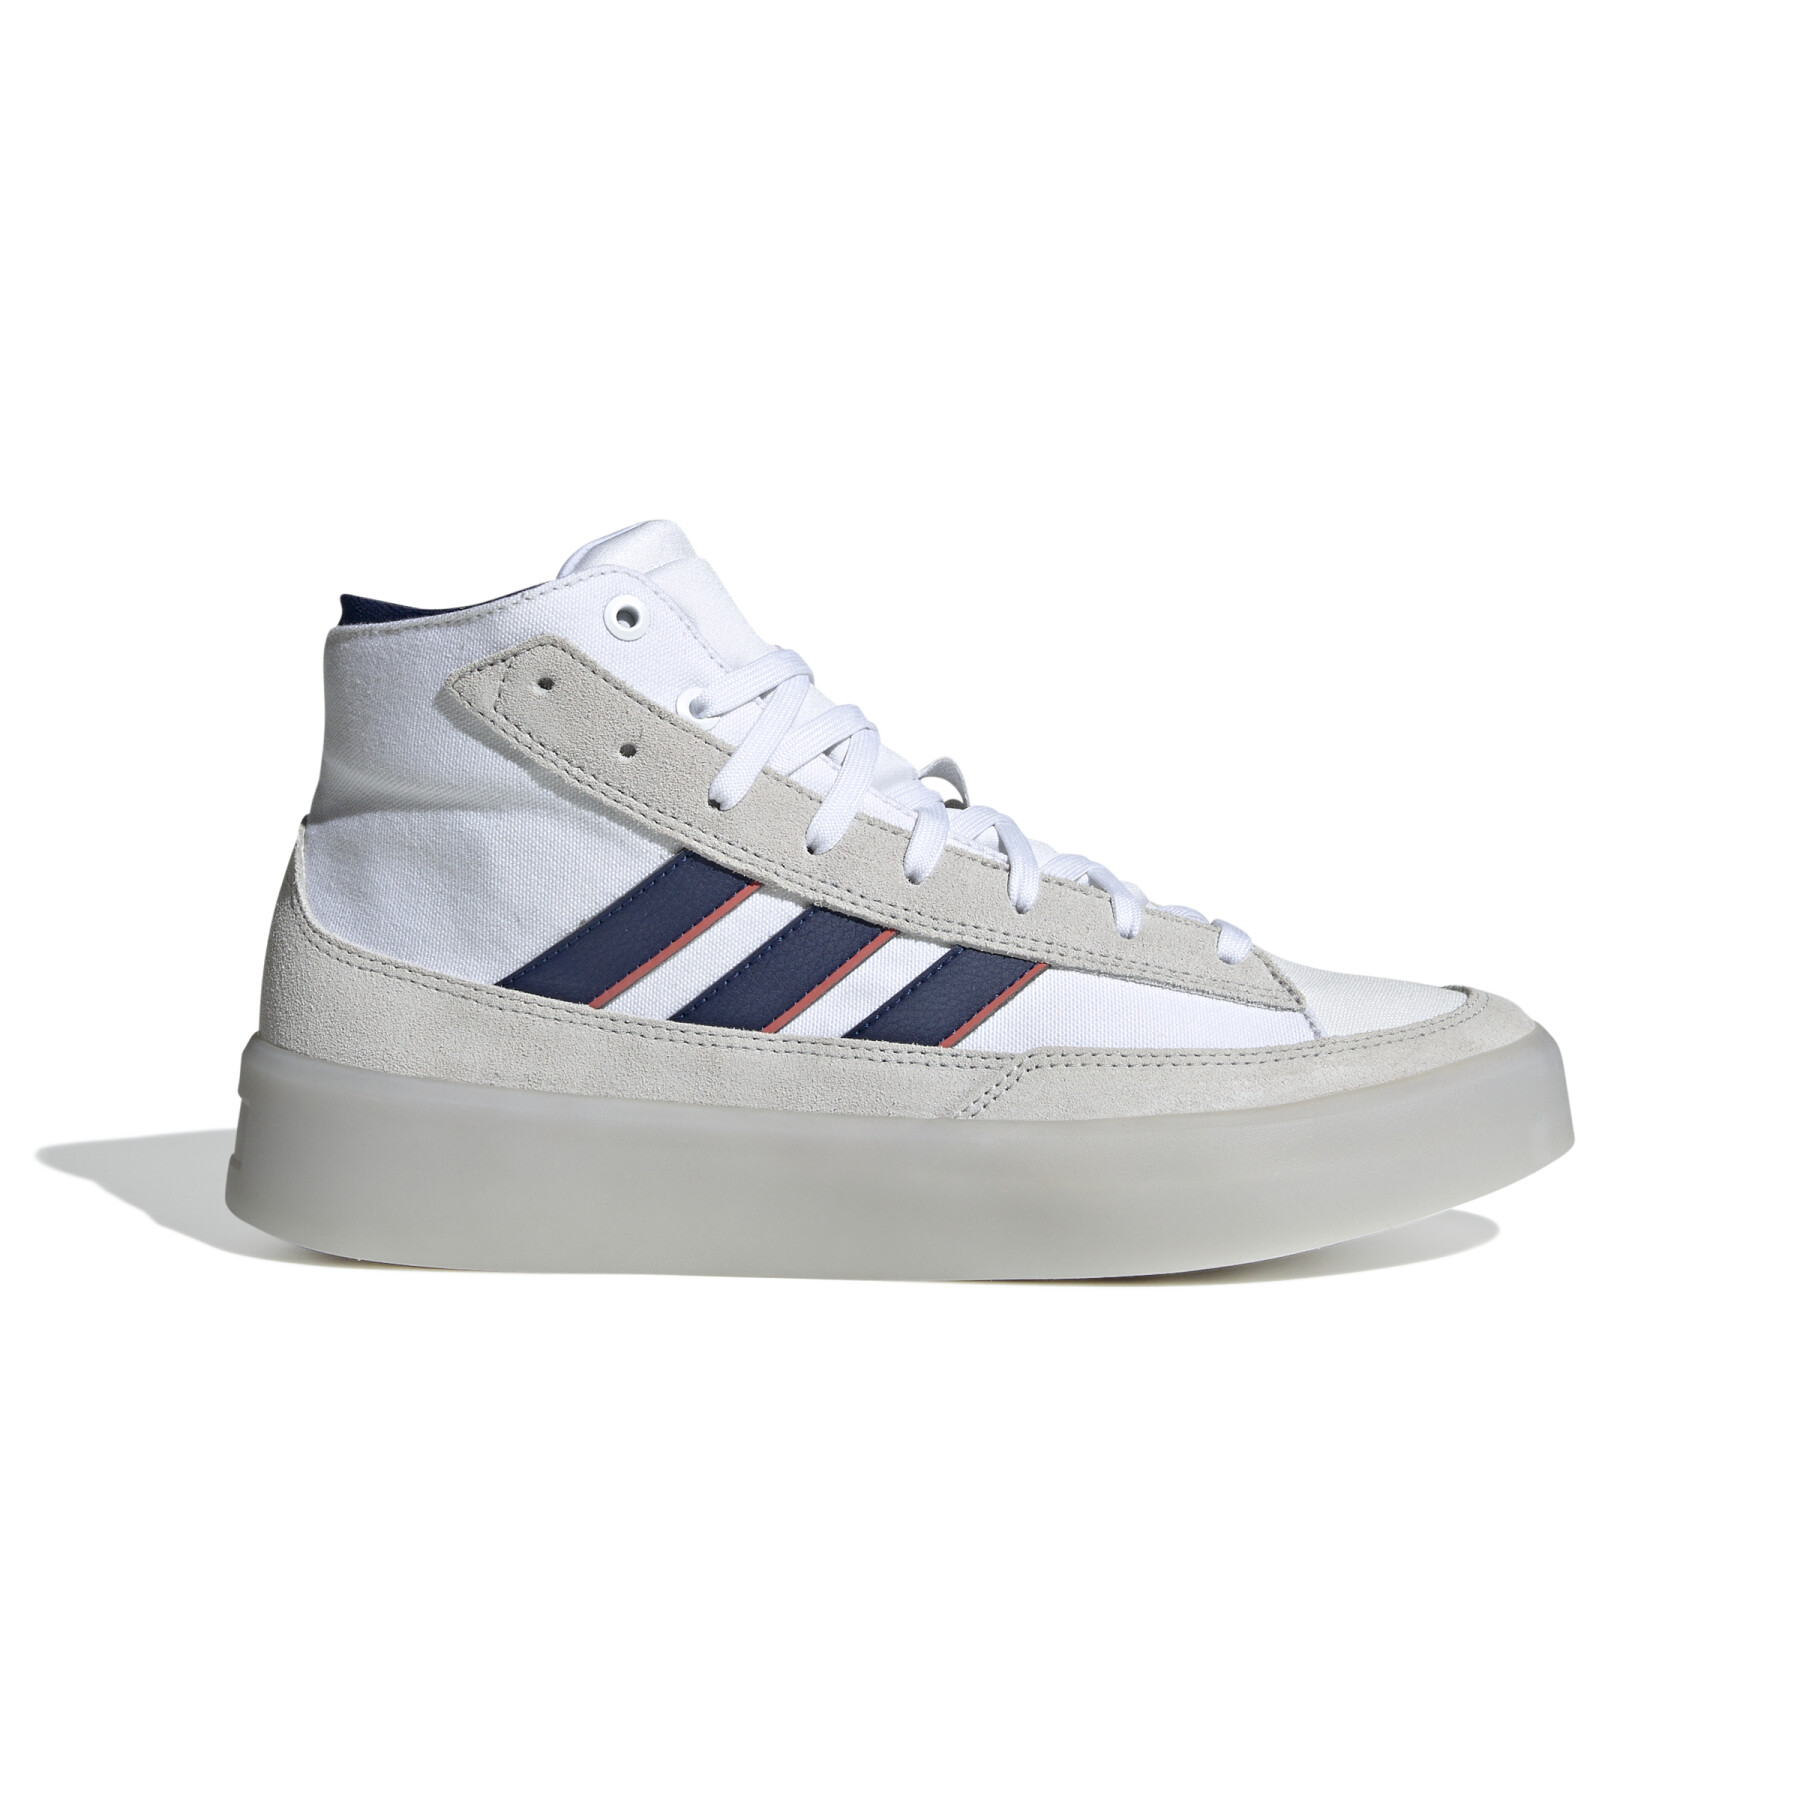 High-top sneakers adidas Znsored